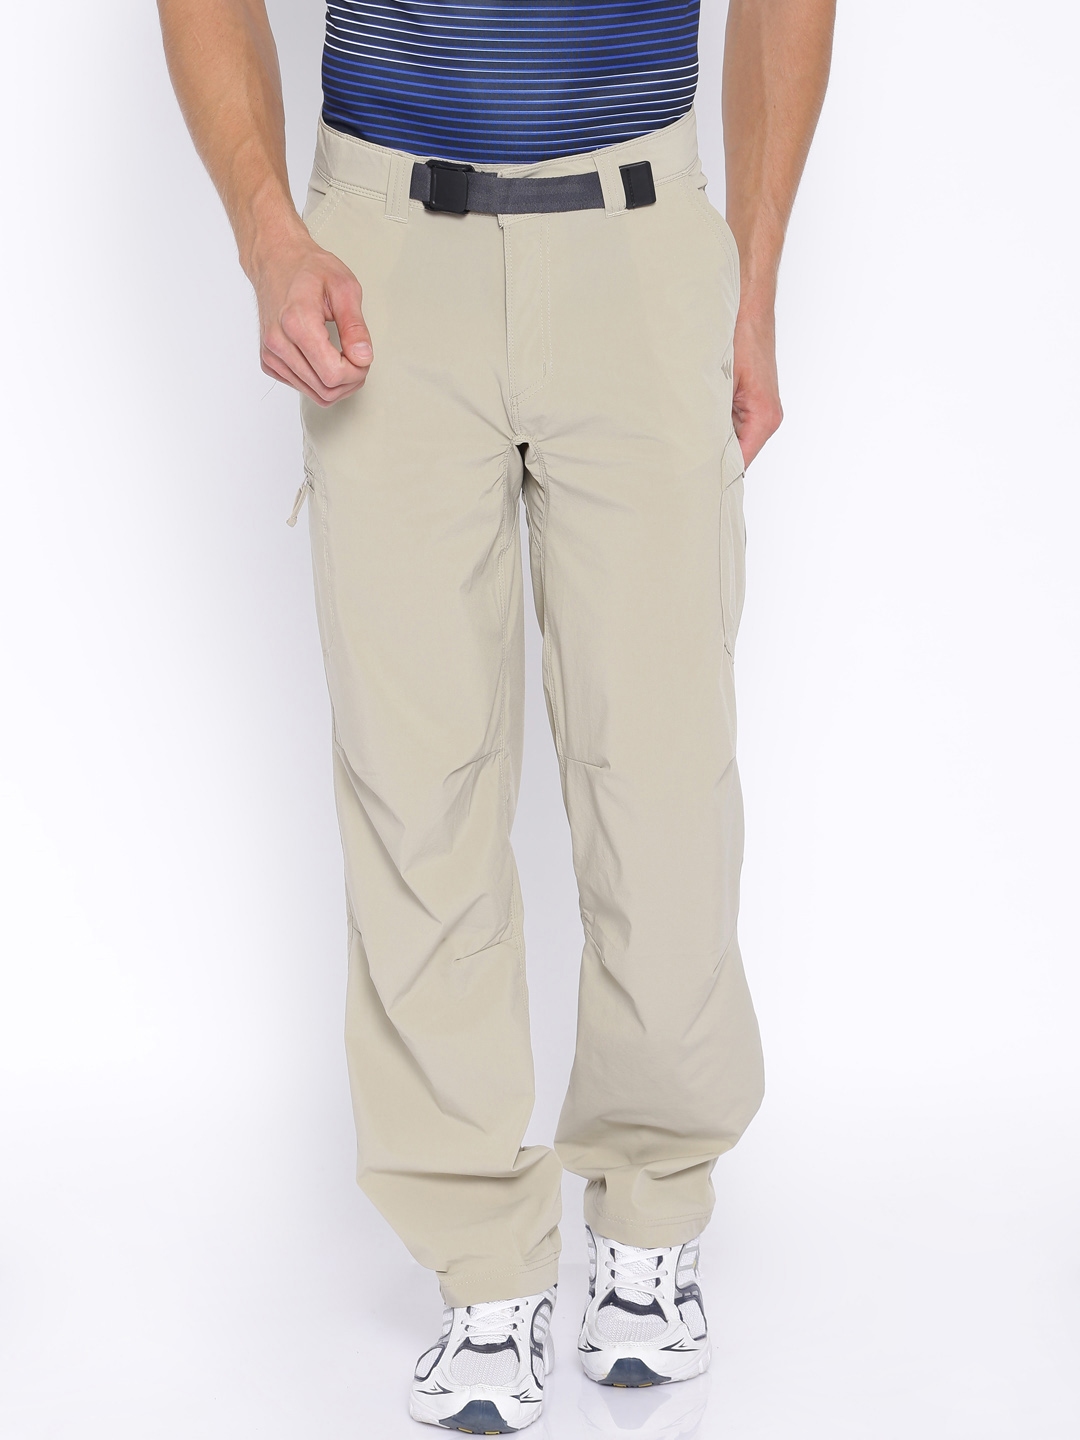 Buy NEXT Men Black Solid Laundered Cargos  Trousers for Men 6694232   Myntra